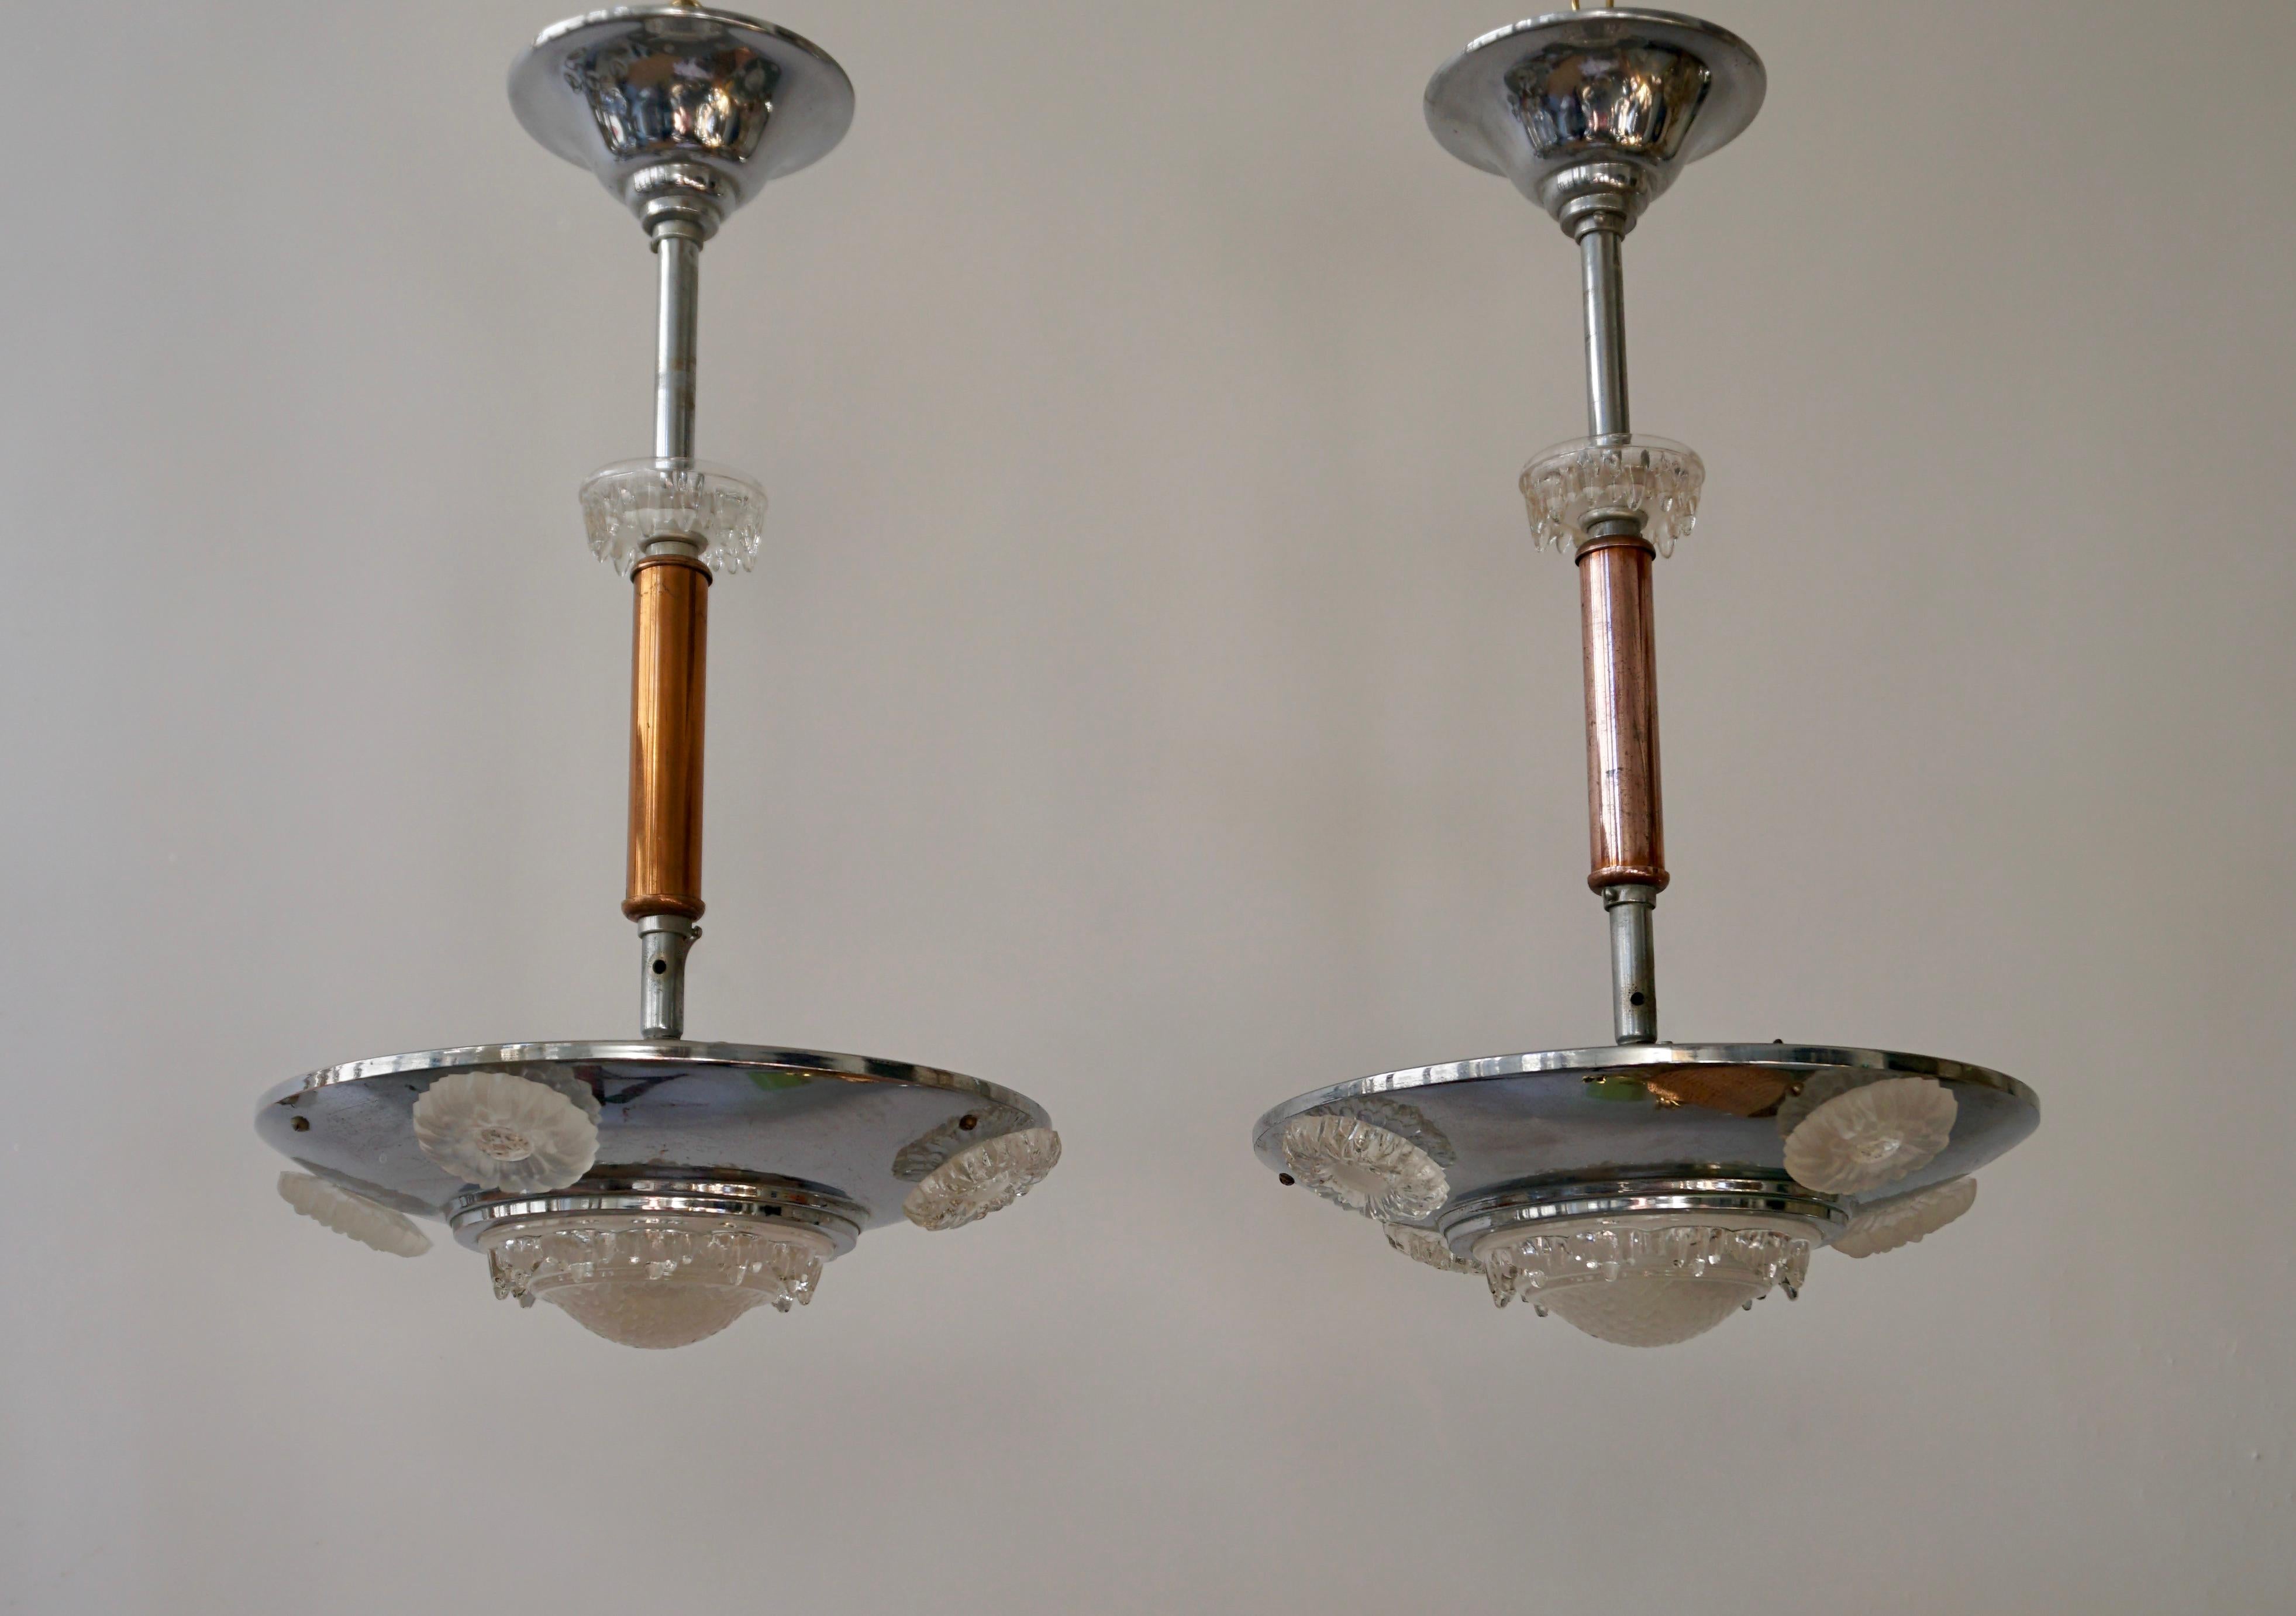 Two Art Deco chandeliers in glass, brass and chrome.

Please note that price is per item not for the set. 